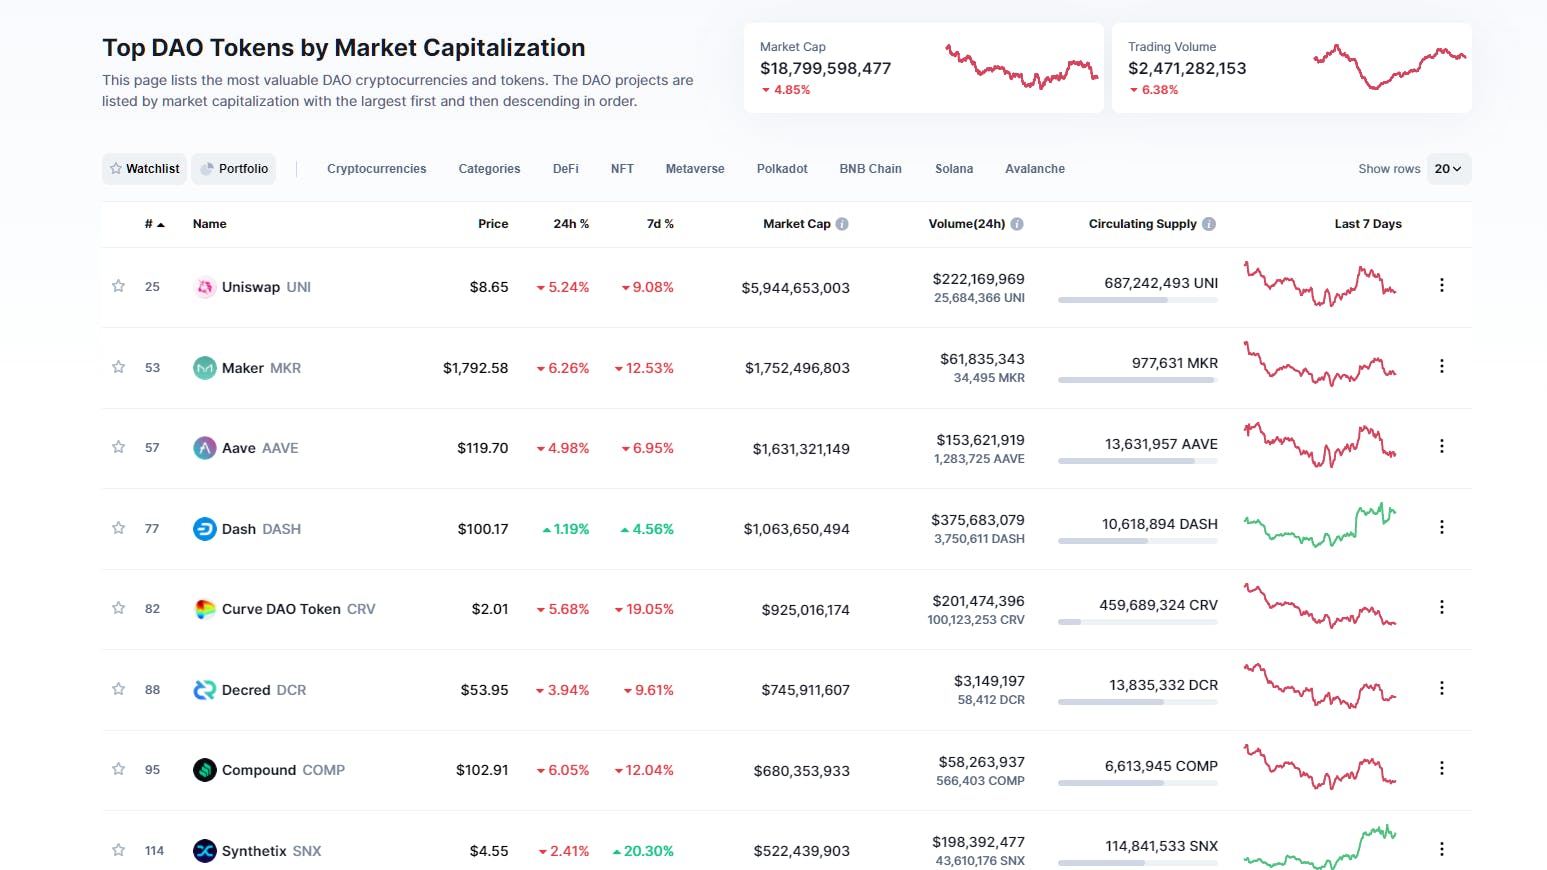 Coinmarketcap.com showing the highest market capitalization DAO projects. In order: Uniswap, Maker, Aave, Dash, Curve DAO Token, Decred, Compound